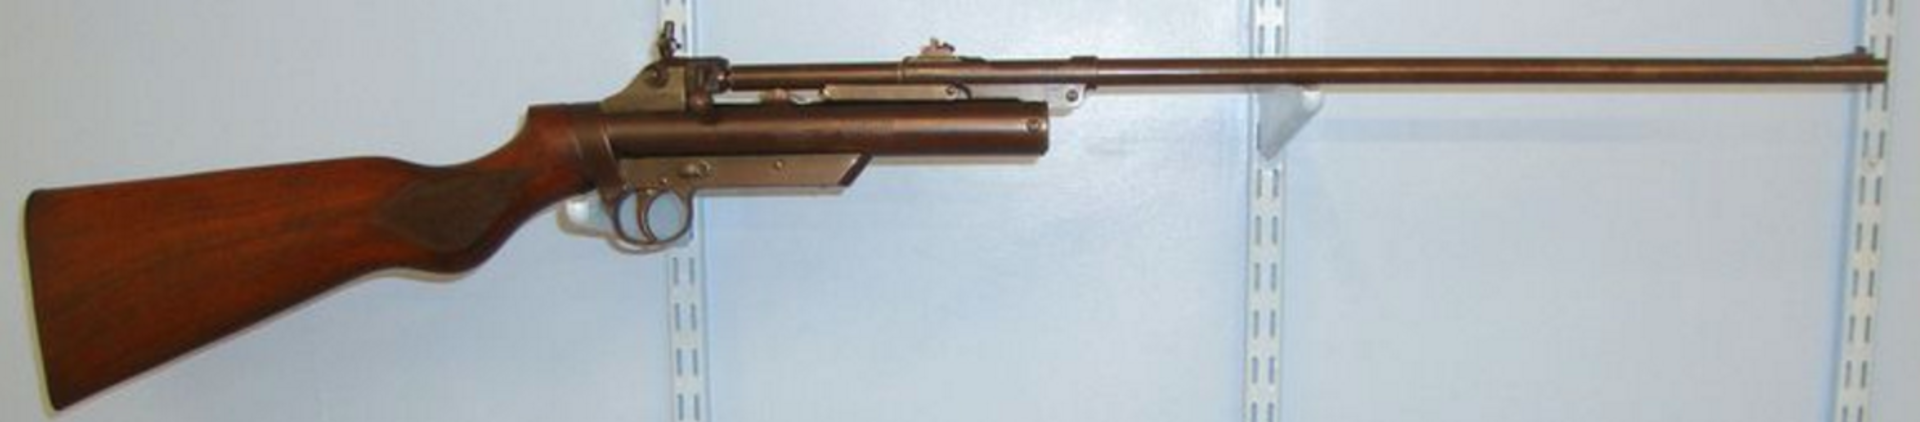 RARE, 1930's Webley Service 2nd Series/ Type .177 Calibre Air Rifle With Safety Catch.